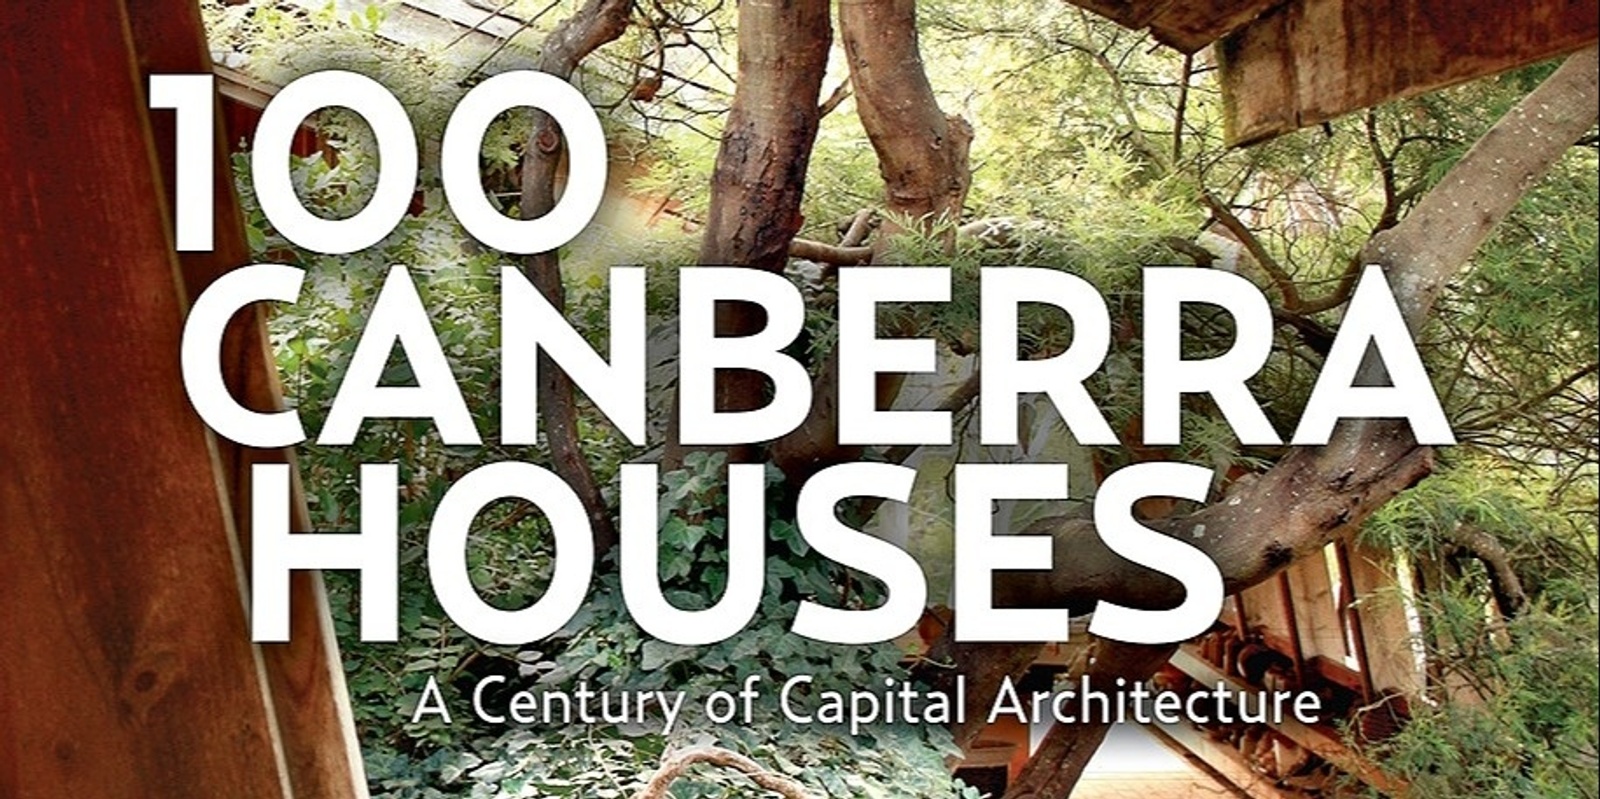 Banner image for 100 Canberra Houses: panel discussion with authors Tim Reeves,  Alan Roberts and architect Roger Pegrum